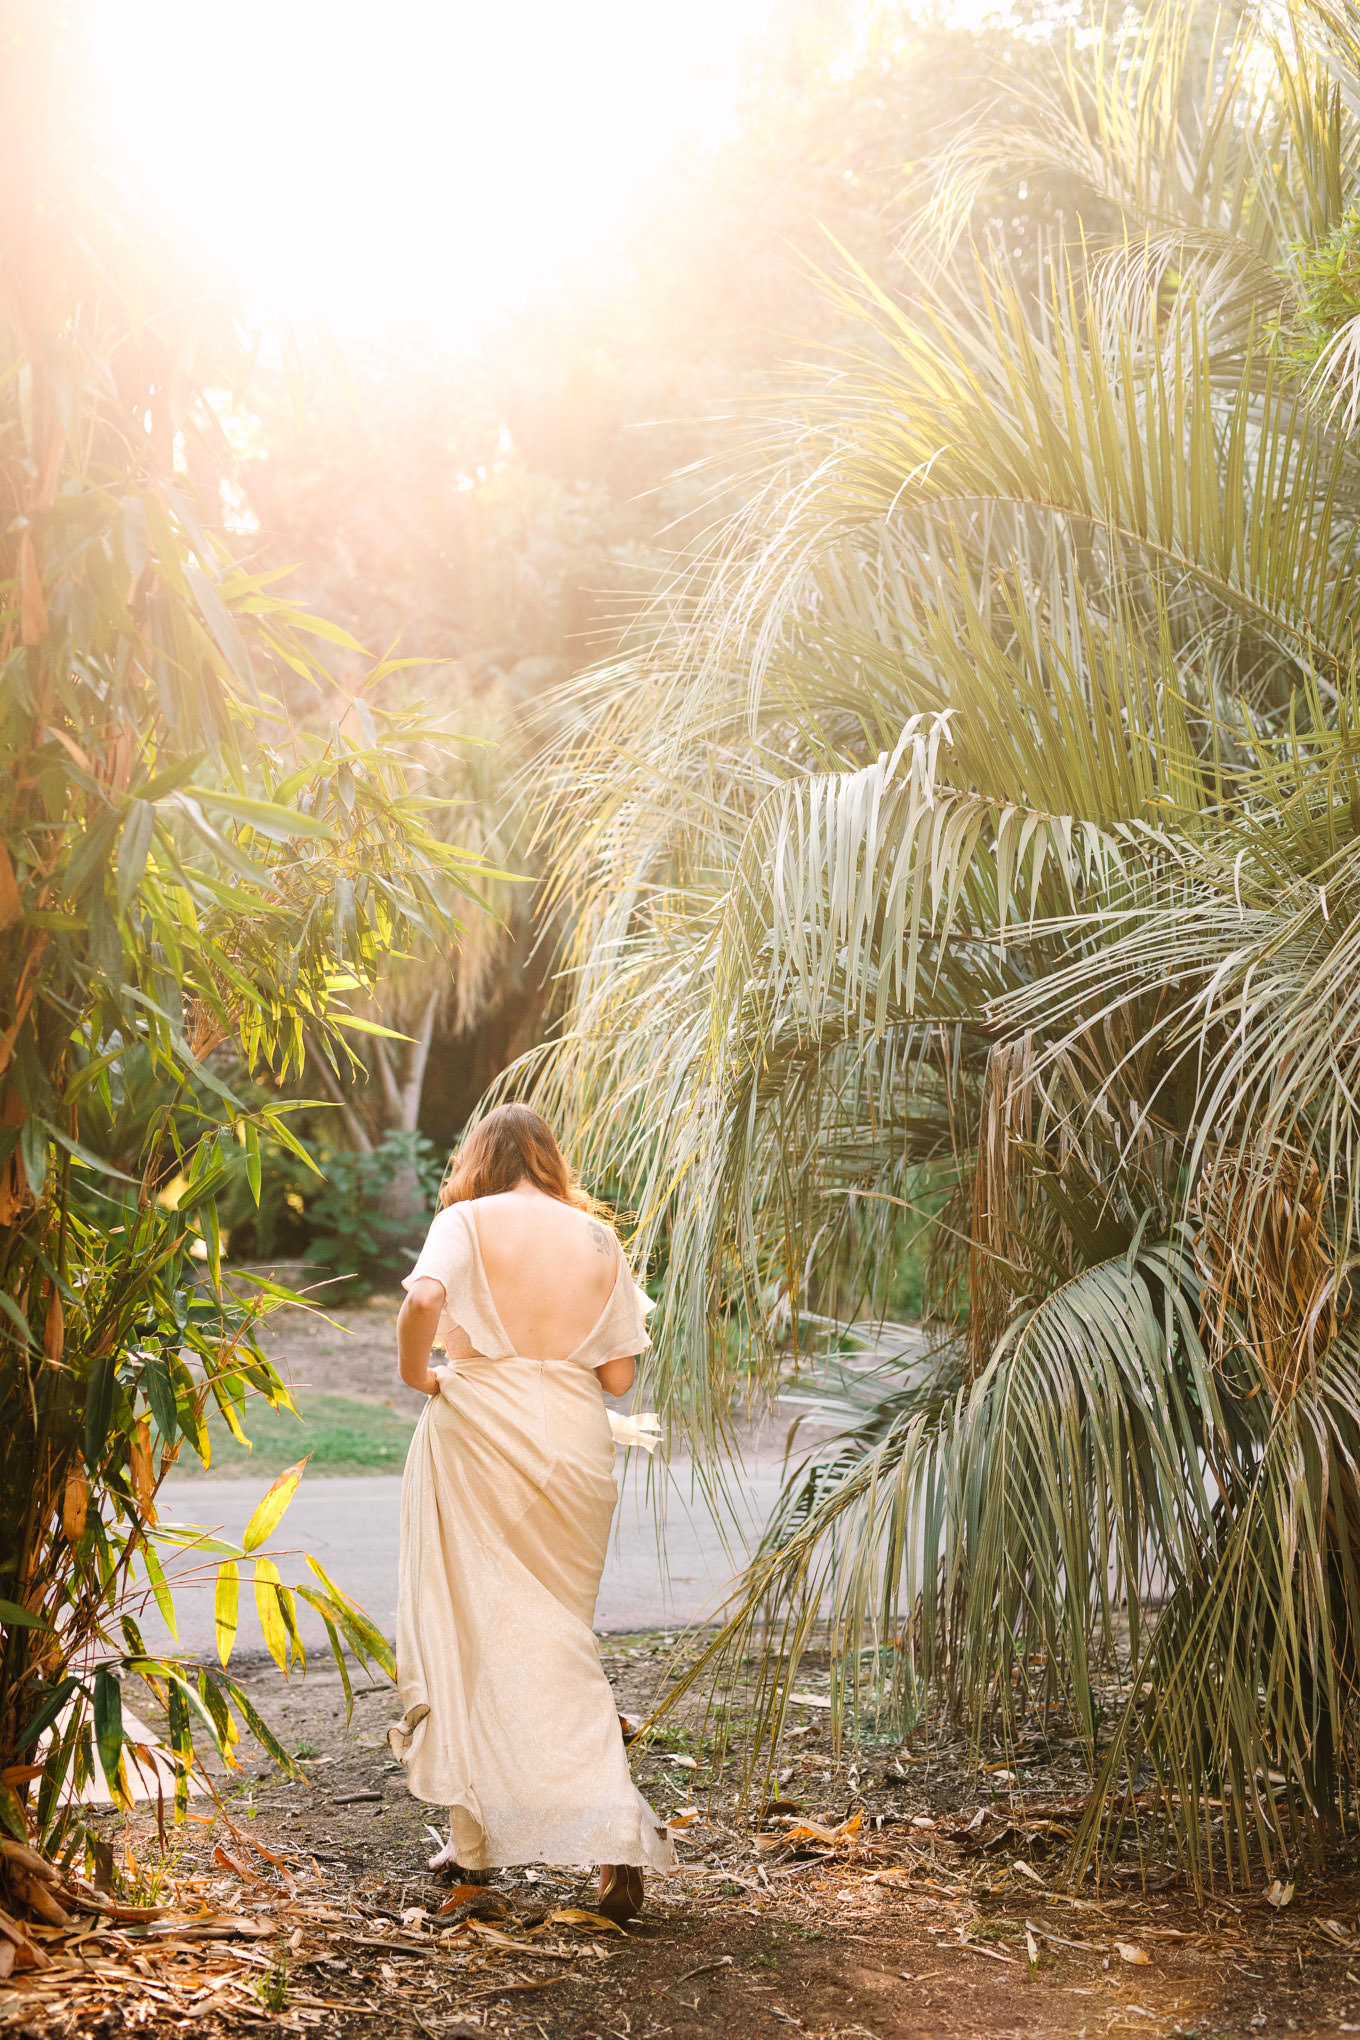 Bride walking among palm trees | Los Angeles Arboretum Elopement | Colorful and elevated wedding photography for fun-loving couples in Southern California | #LosAngelesElopement #elopement #LAarboretum #LAskyline #elopementphotos   Source: Mary Costa Photography | Los Angeles